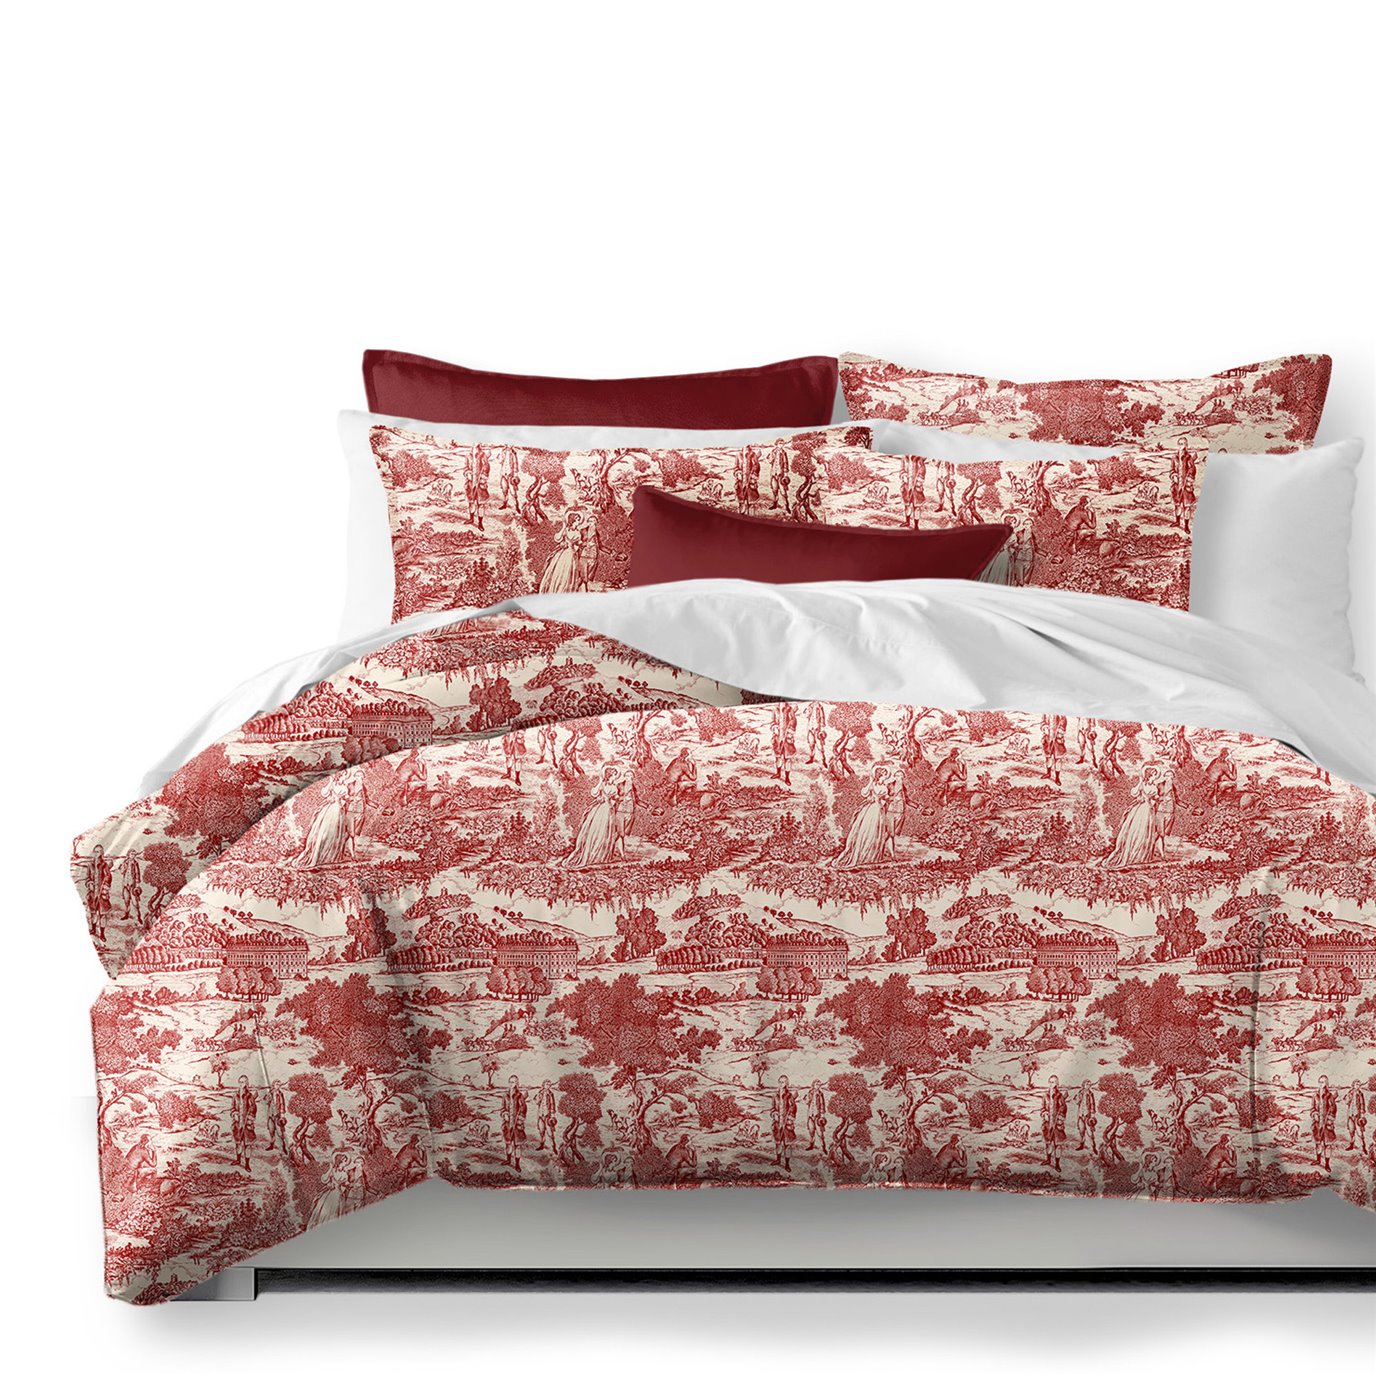 Beau Toile Red Coverlet and Pillow Sham(s) Set - Size Twin